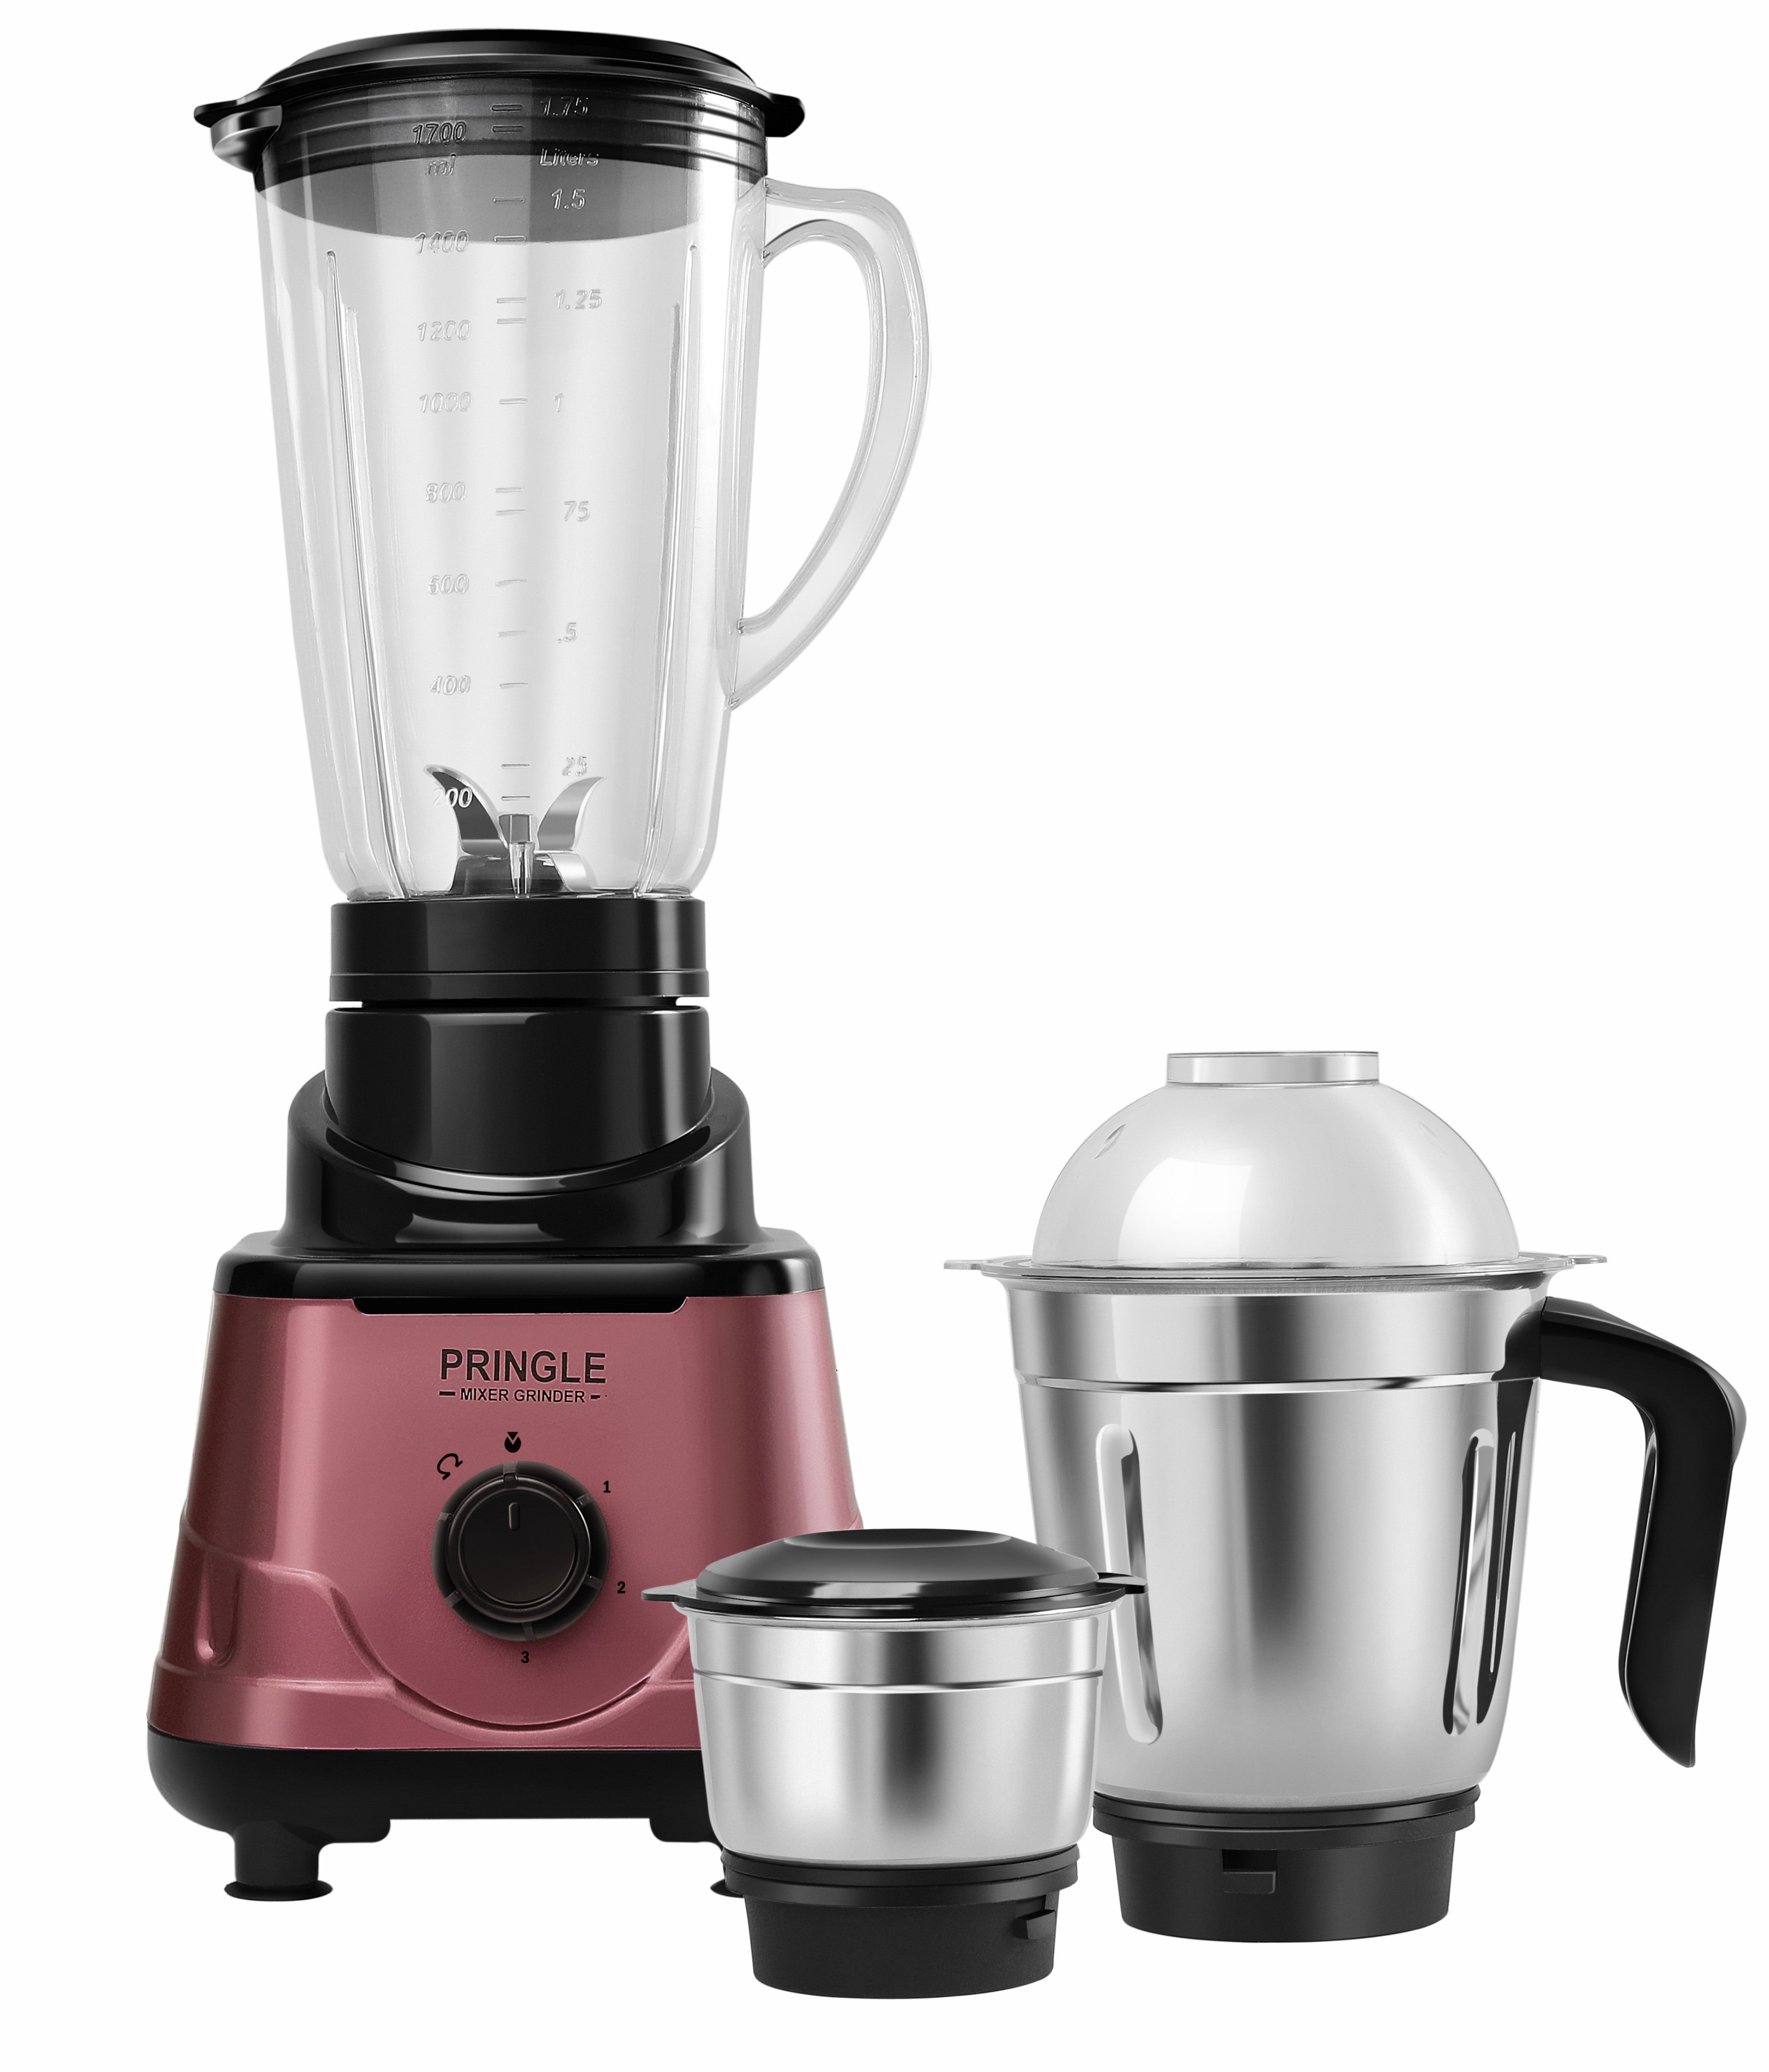 stainless steel blender with powerful motor